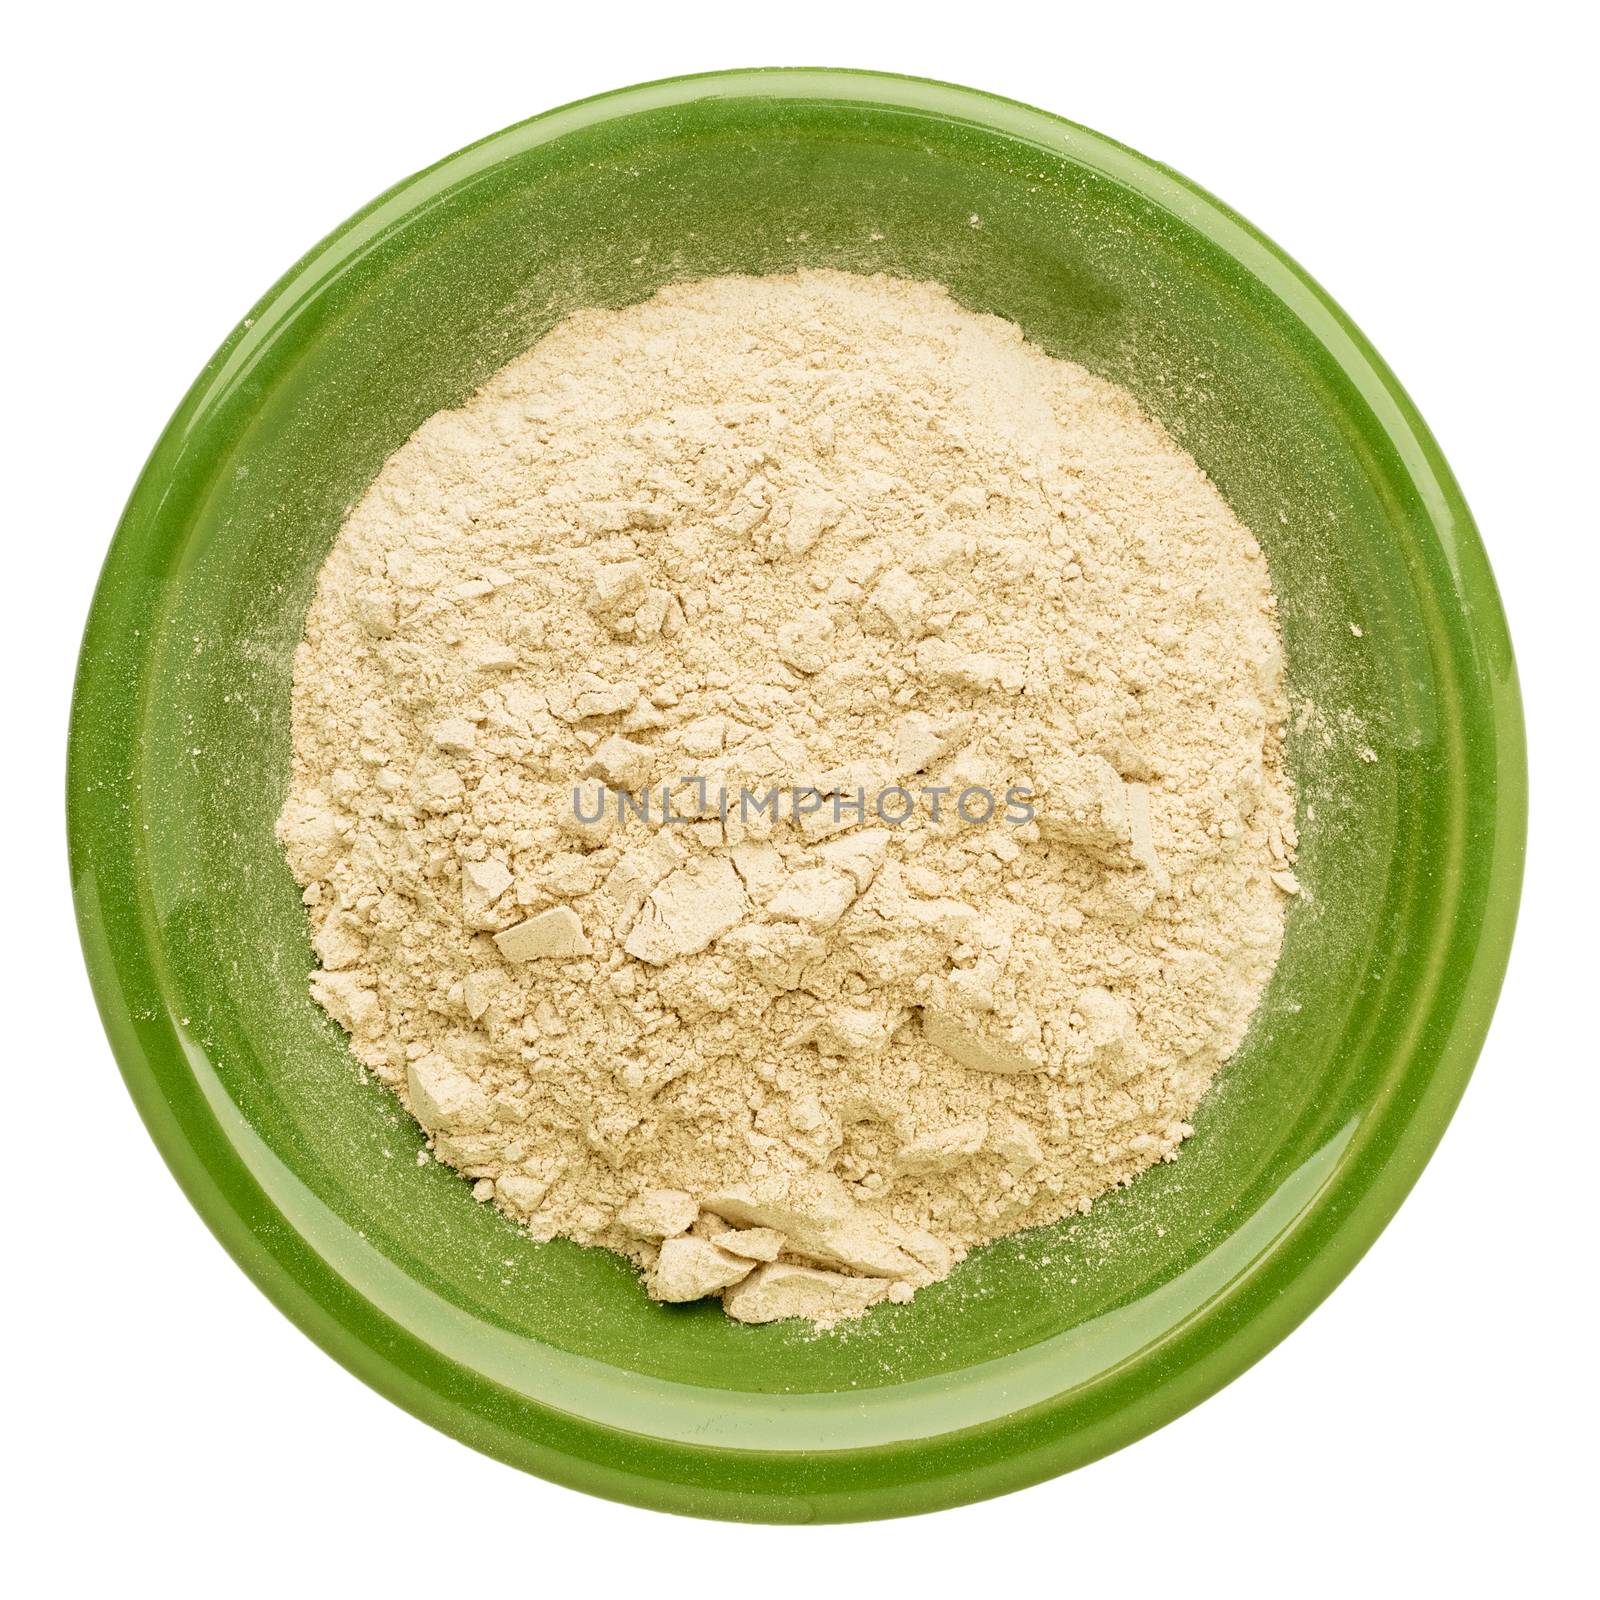 maca root powder in an isolated green ceramic bowl